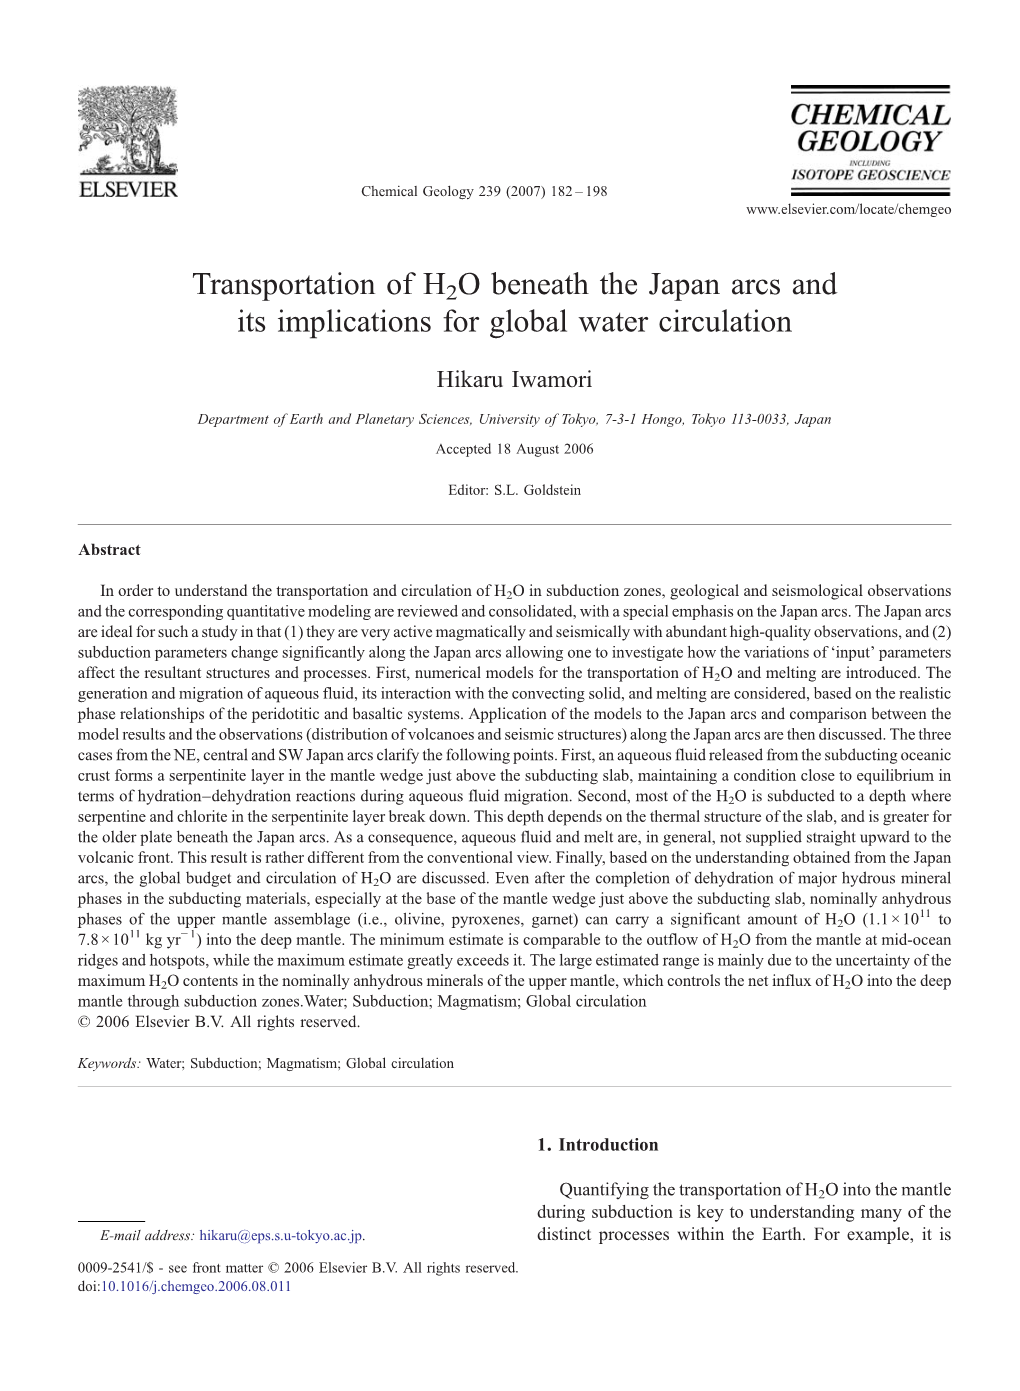 Transportation of H2O Beneath the Japan Arcs and Its Implications for Global Water Circulation